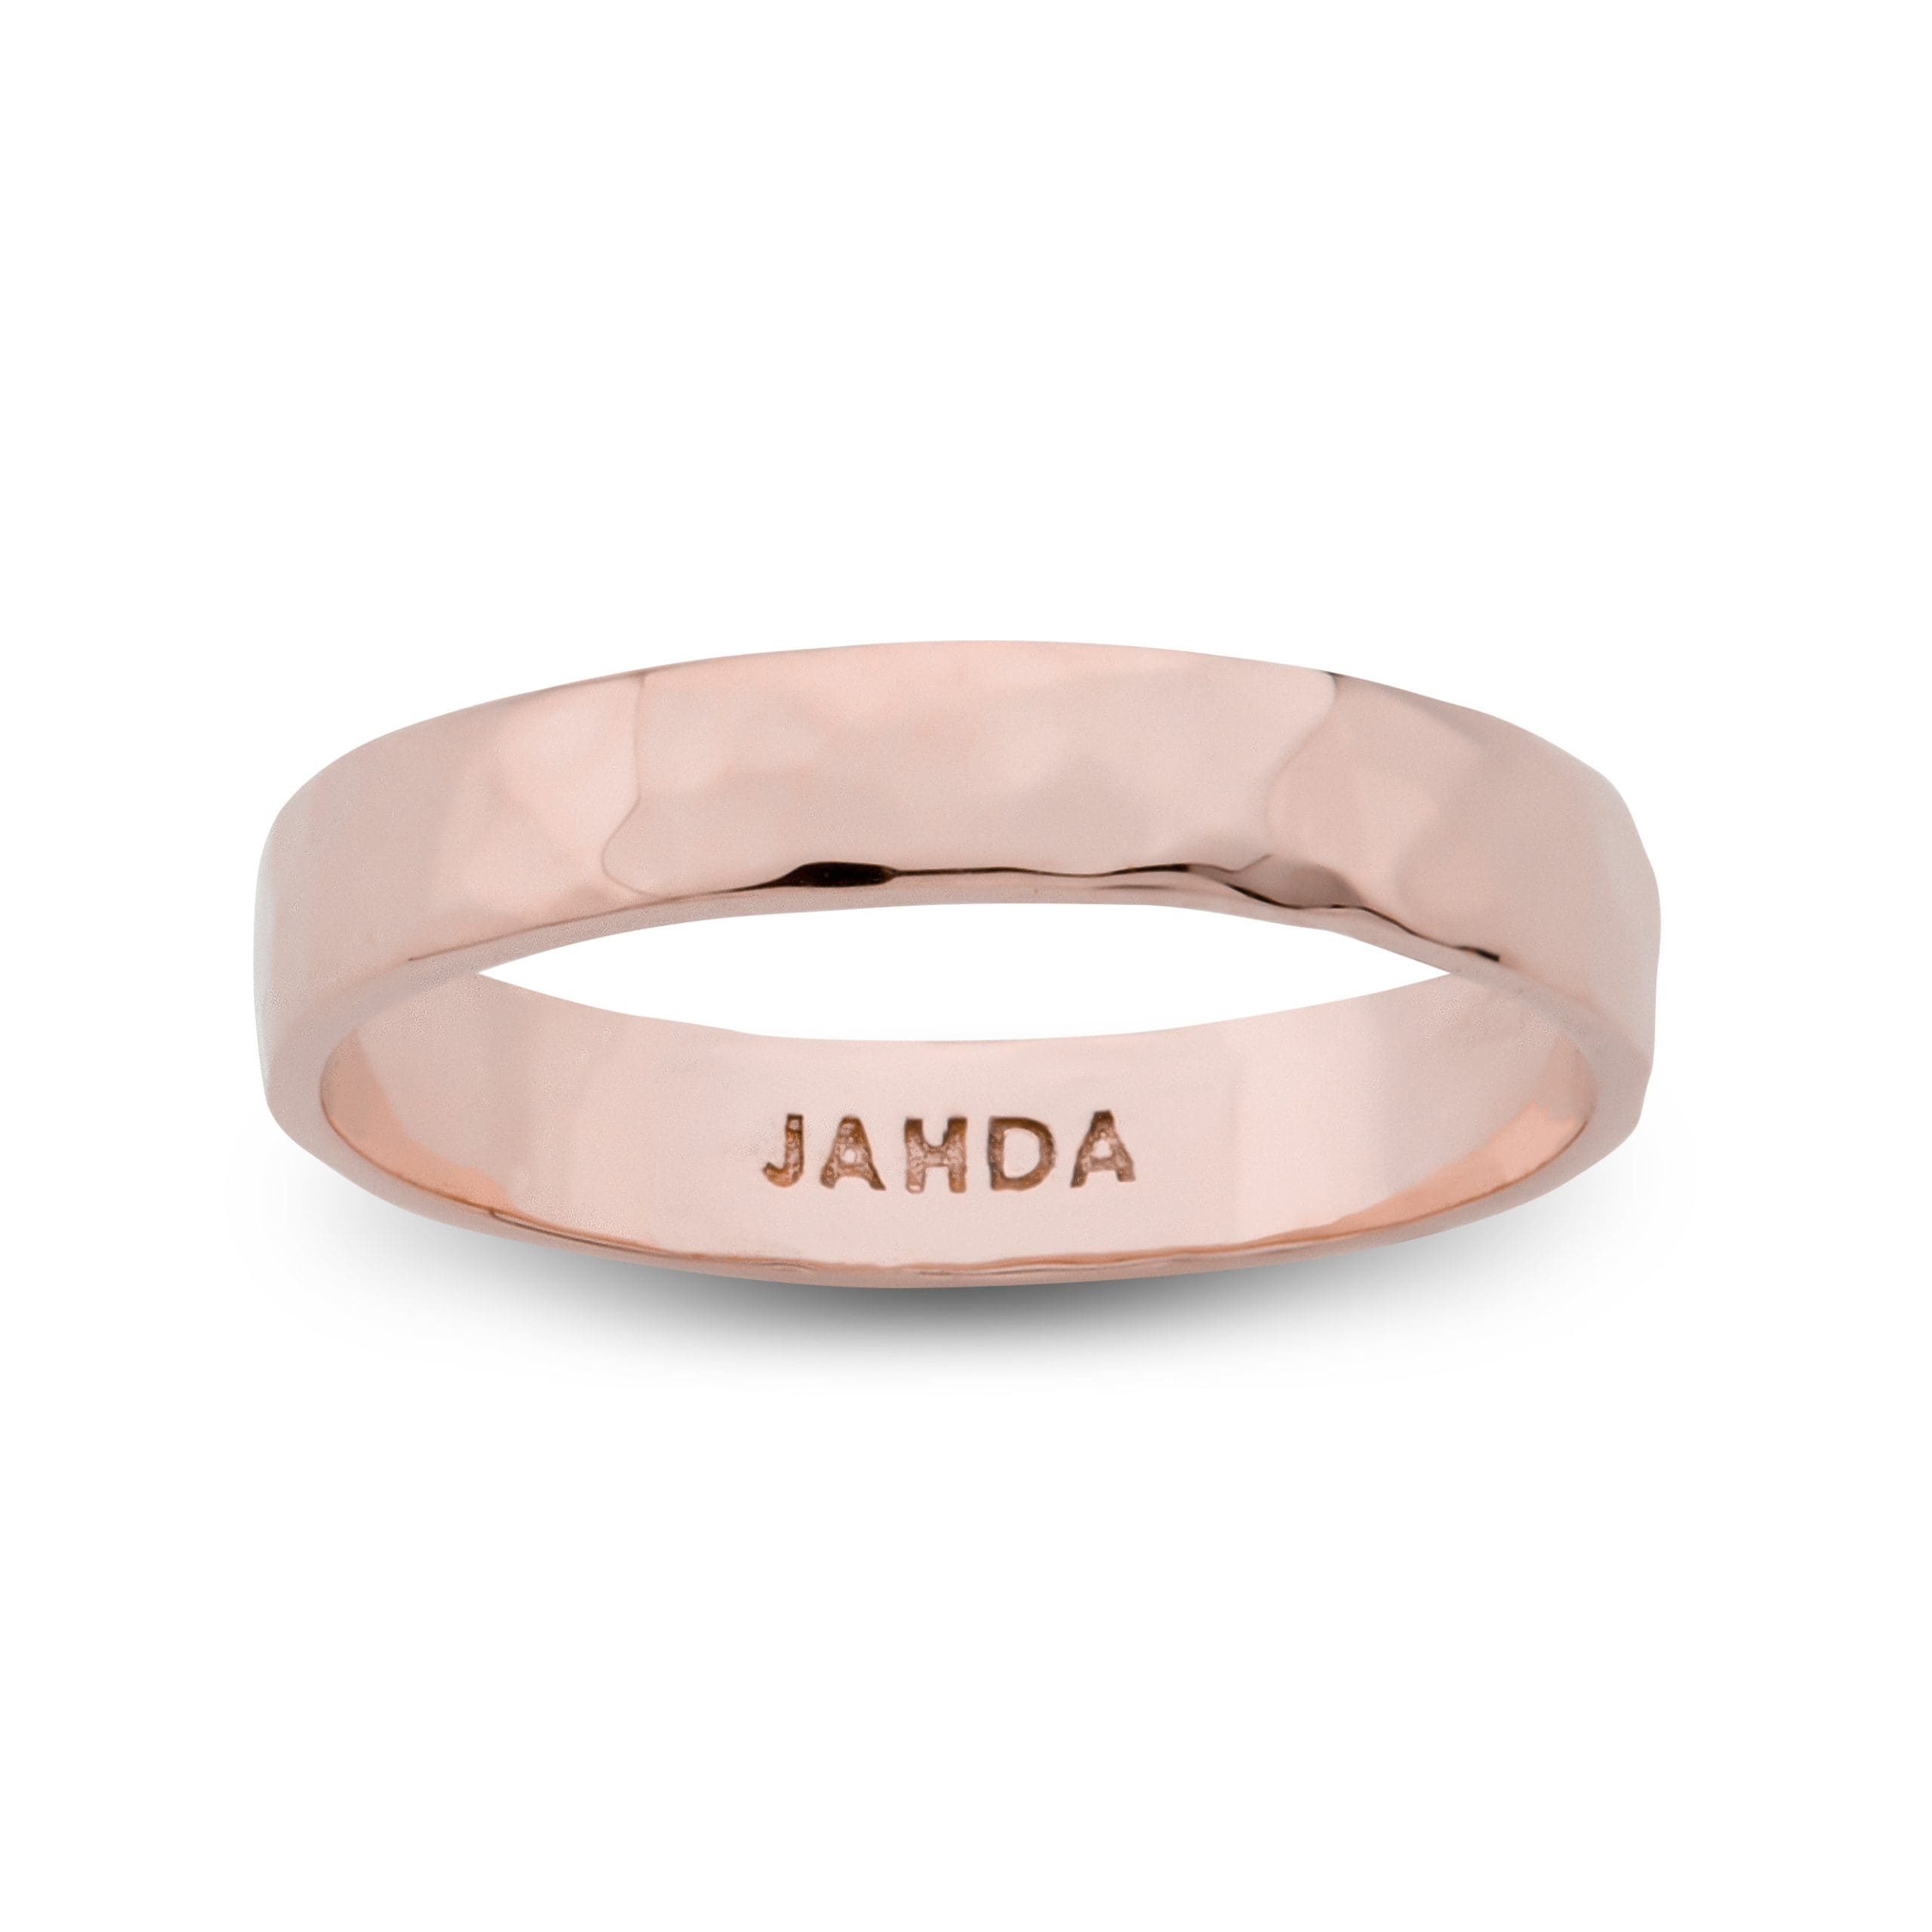 Ring Sizer for the Perfect Ring Fit, Size 0-15 - Jahda Jewelry Company  Custom Gold Rings, Necklaces, Bracelets & Earrings - Sacramento, California